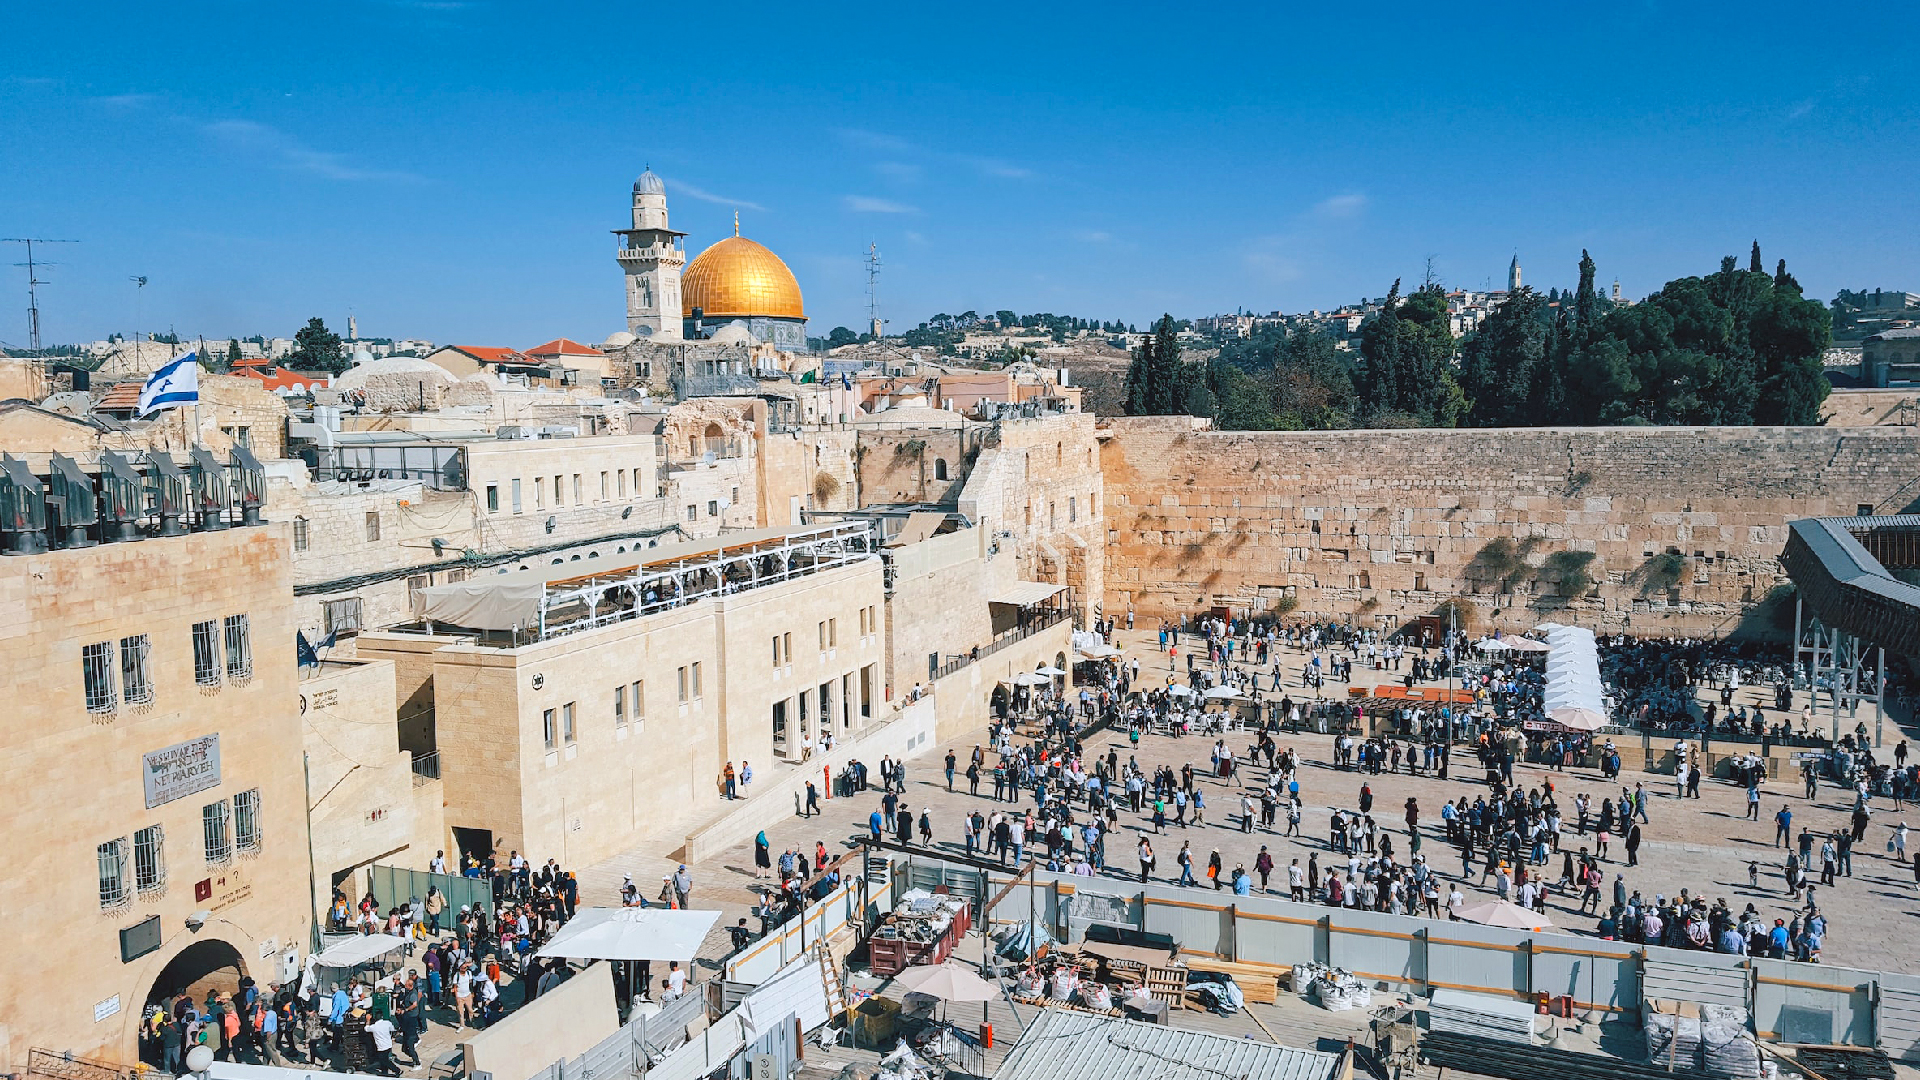 Spring Holidays in the Holy City: Health and Safety Risks for Travelers in Jerusalem 